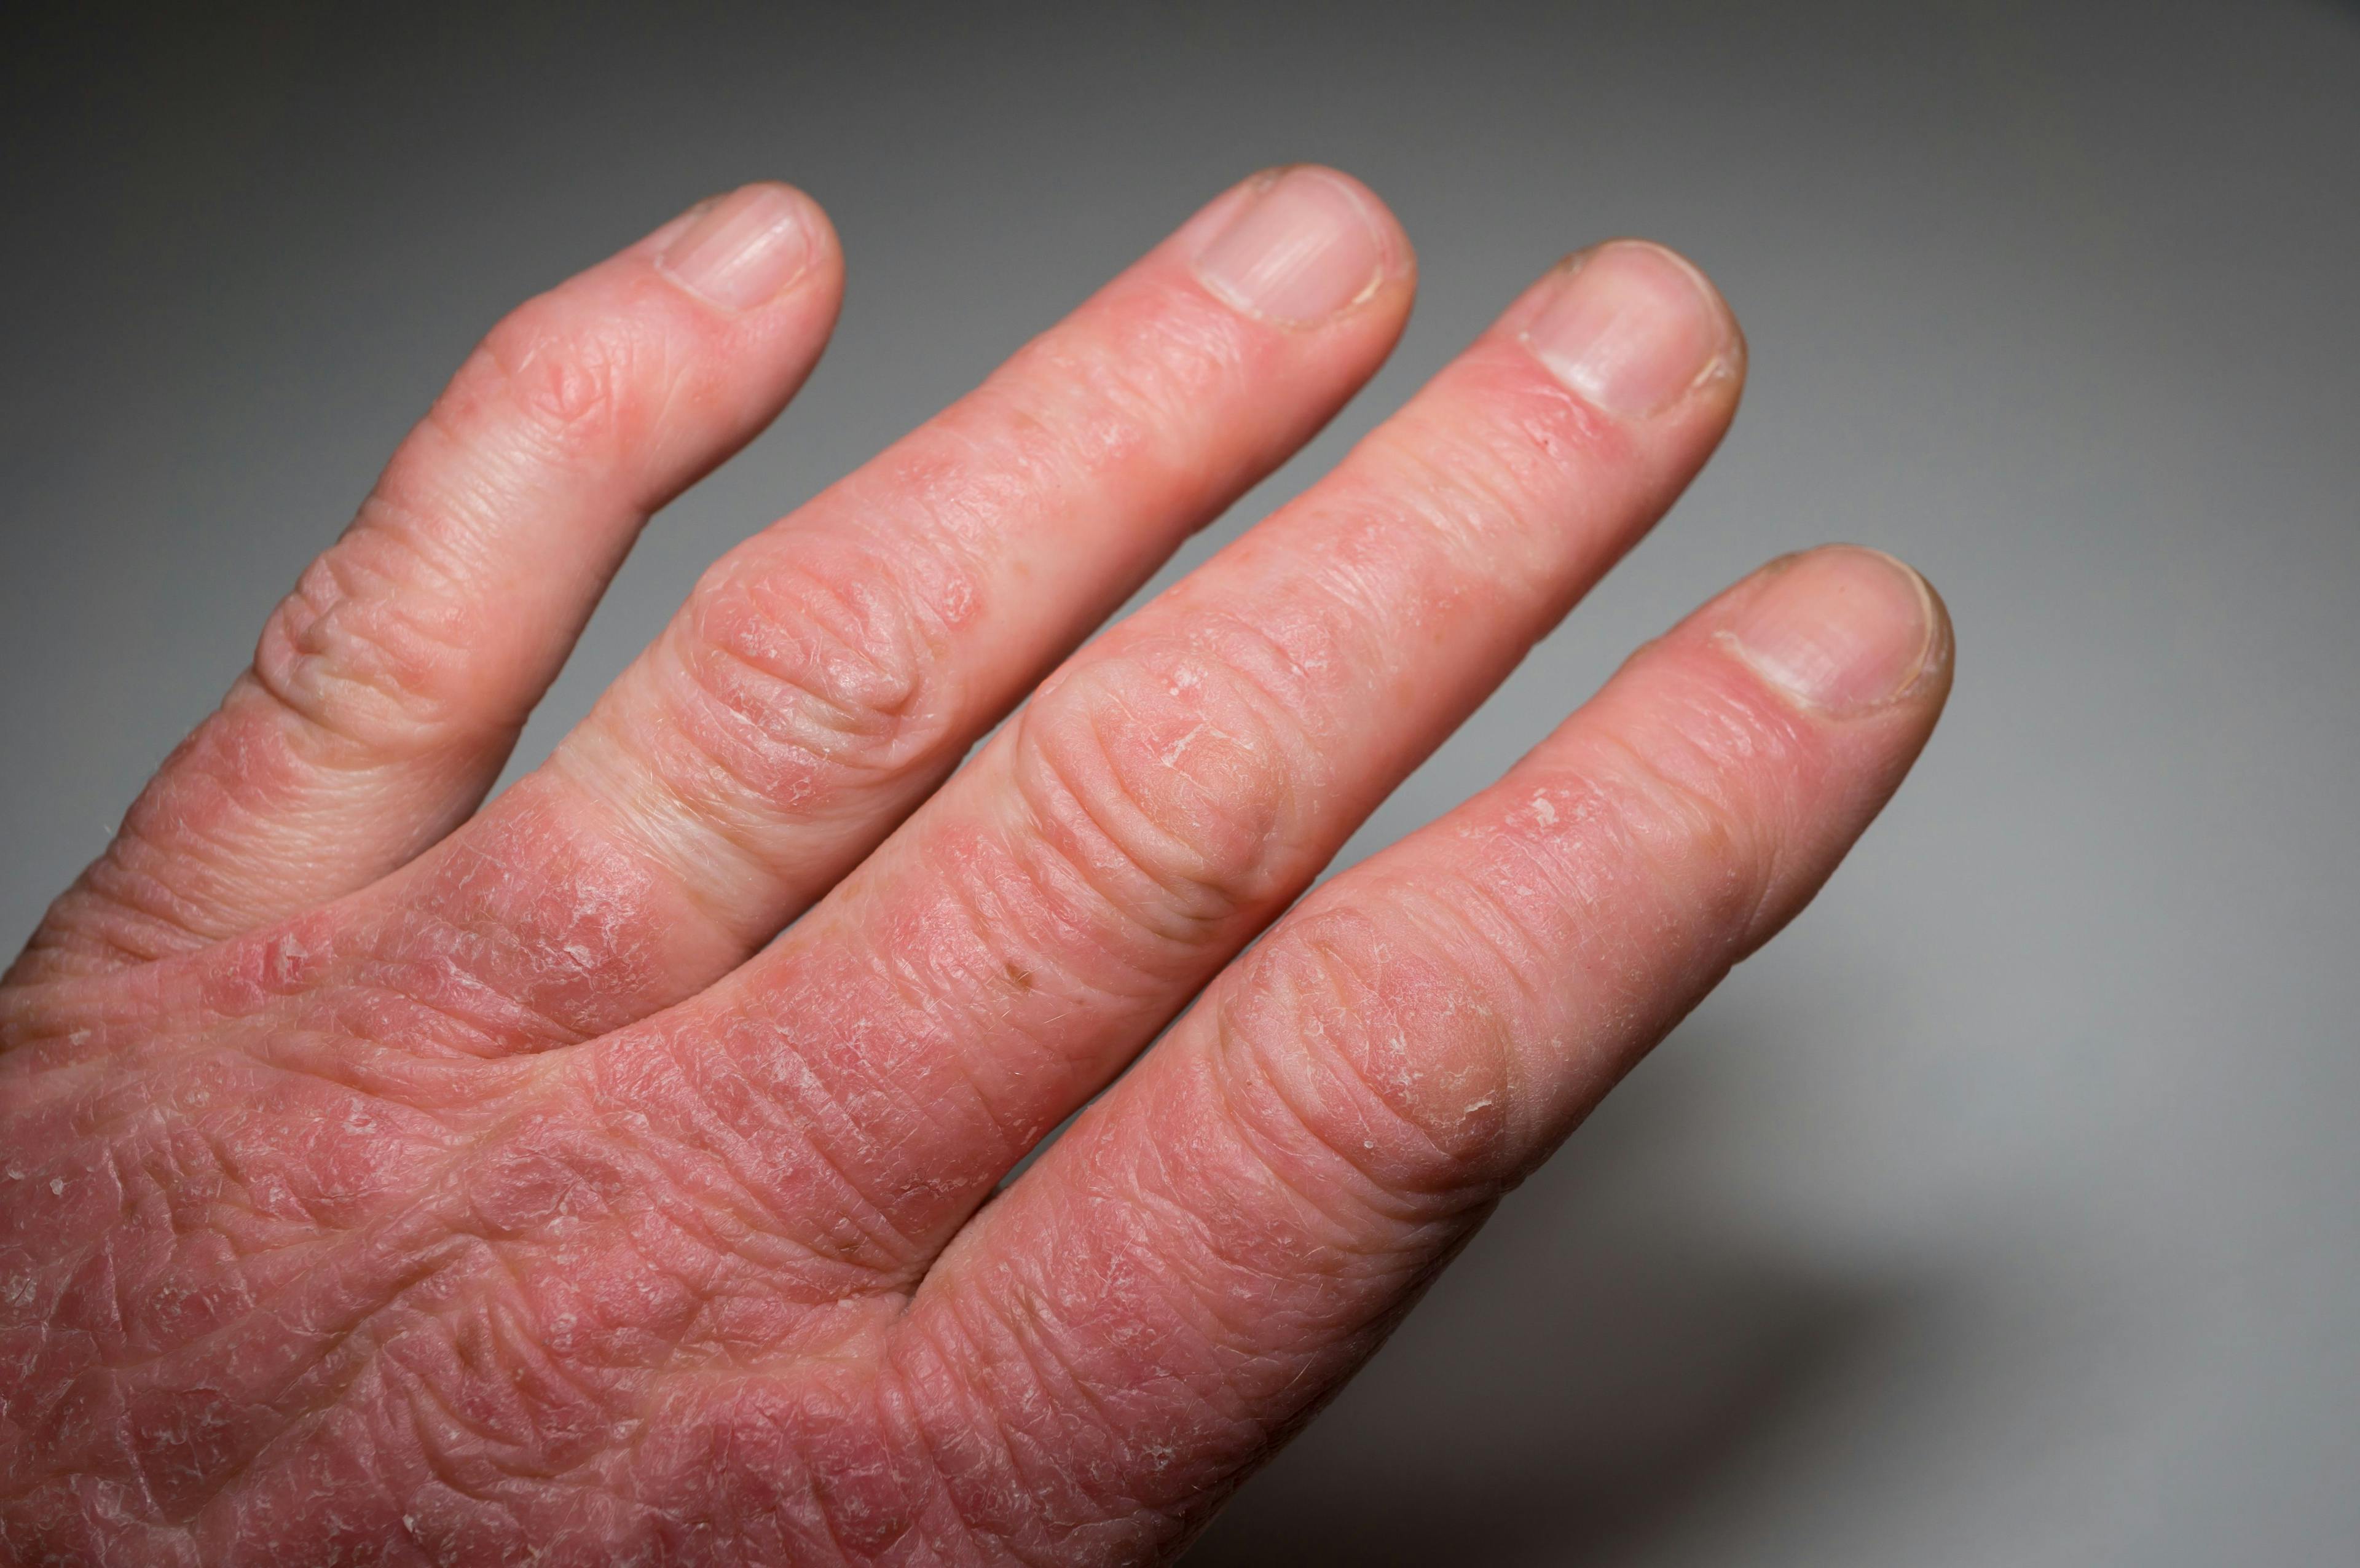 FDA Approves Abrocitinib for Adults with Moderate to Severe Atopic Dermatitis